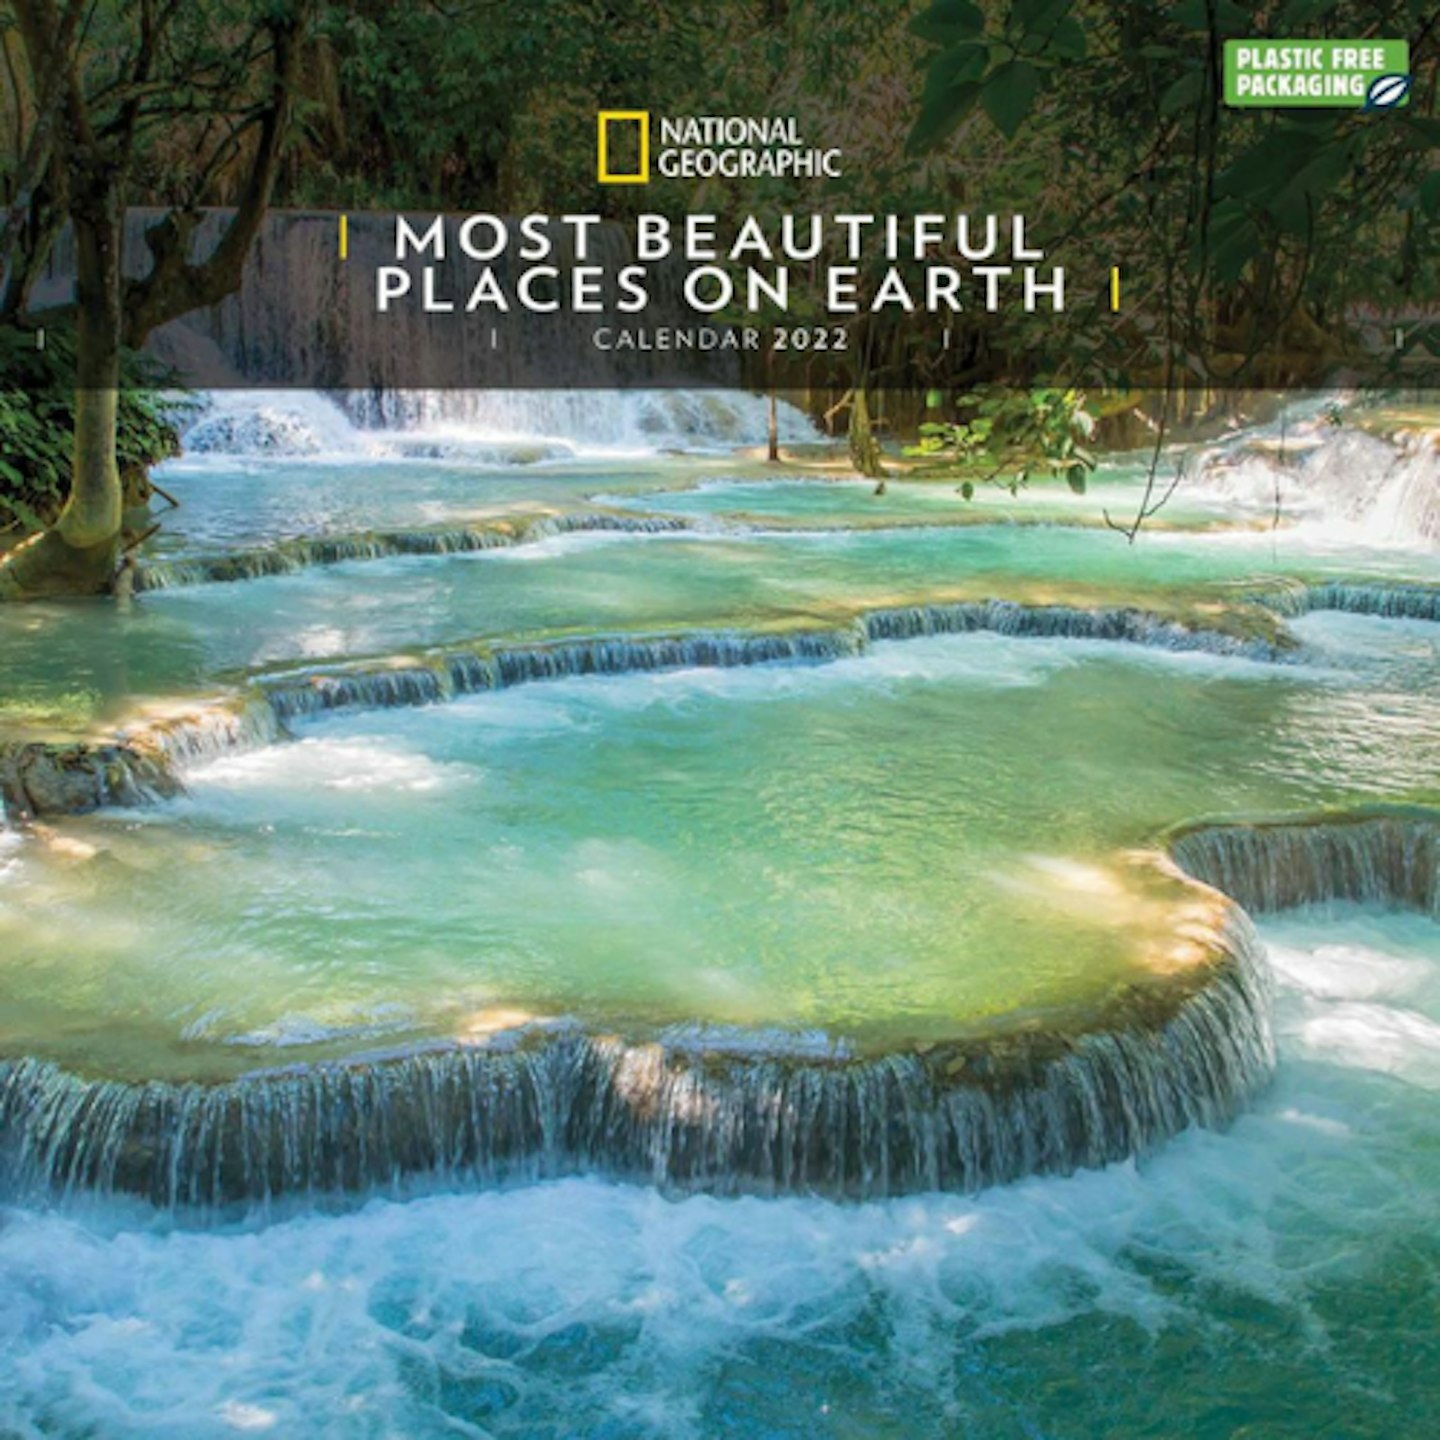 National Geographic, Most Beautiful Places on Earth Calendar 2022